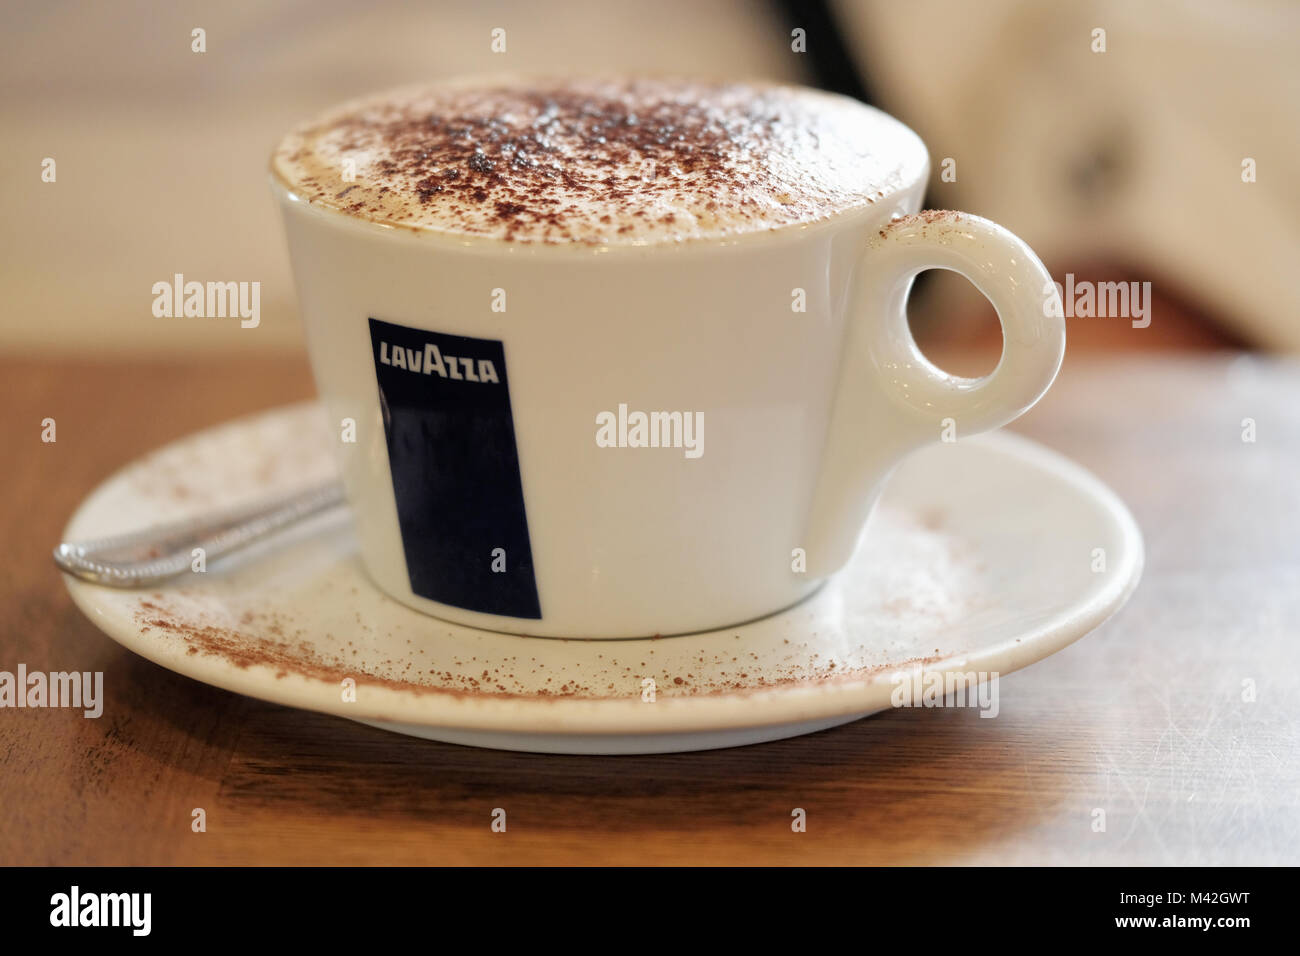 A freshly brewed cup of Lavazza coffee, with a thick crema and chocolate dusting. Served in a Lavazza branded coffee cup clearly showing the logo Stock Photo